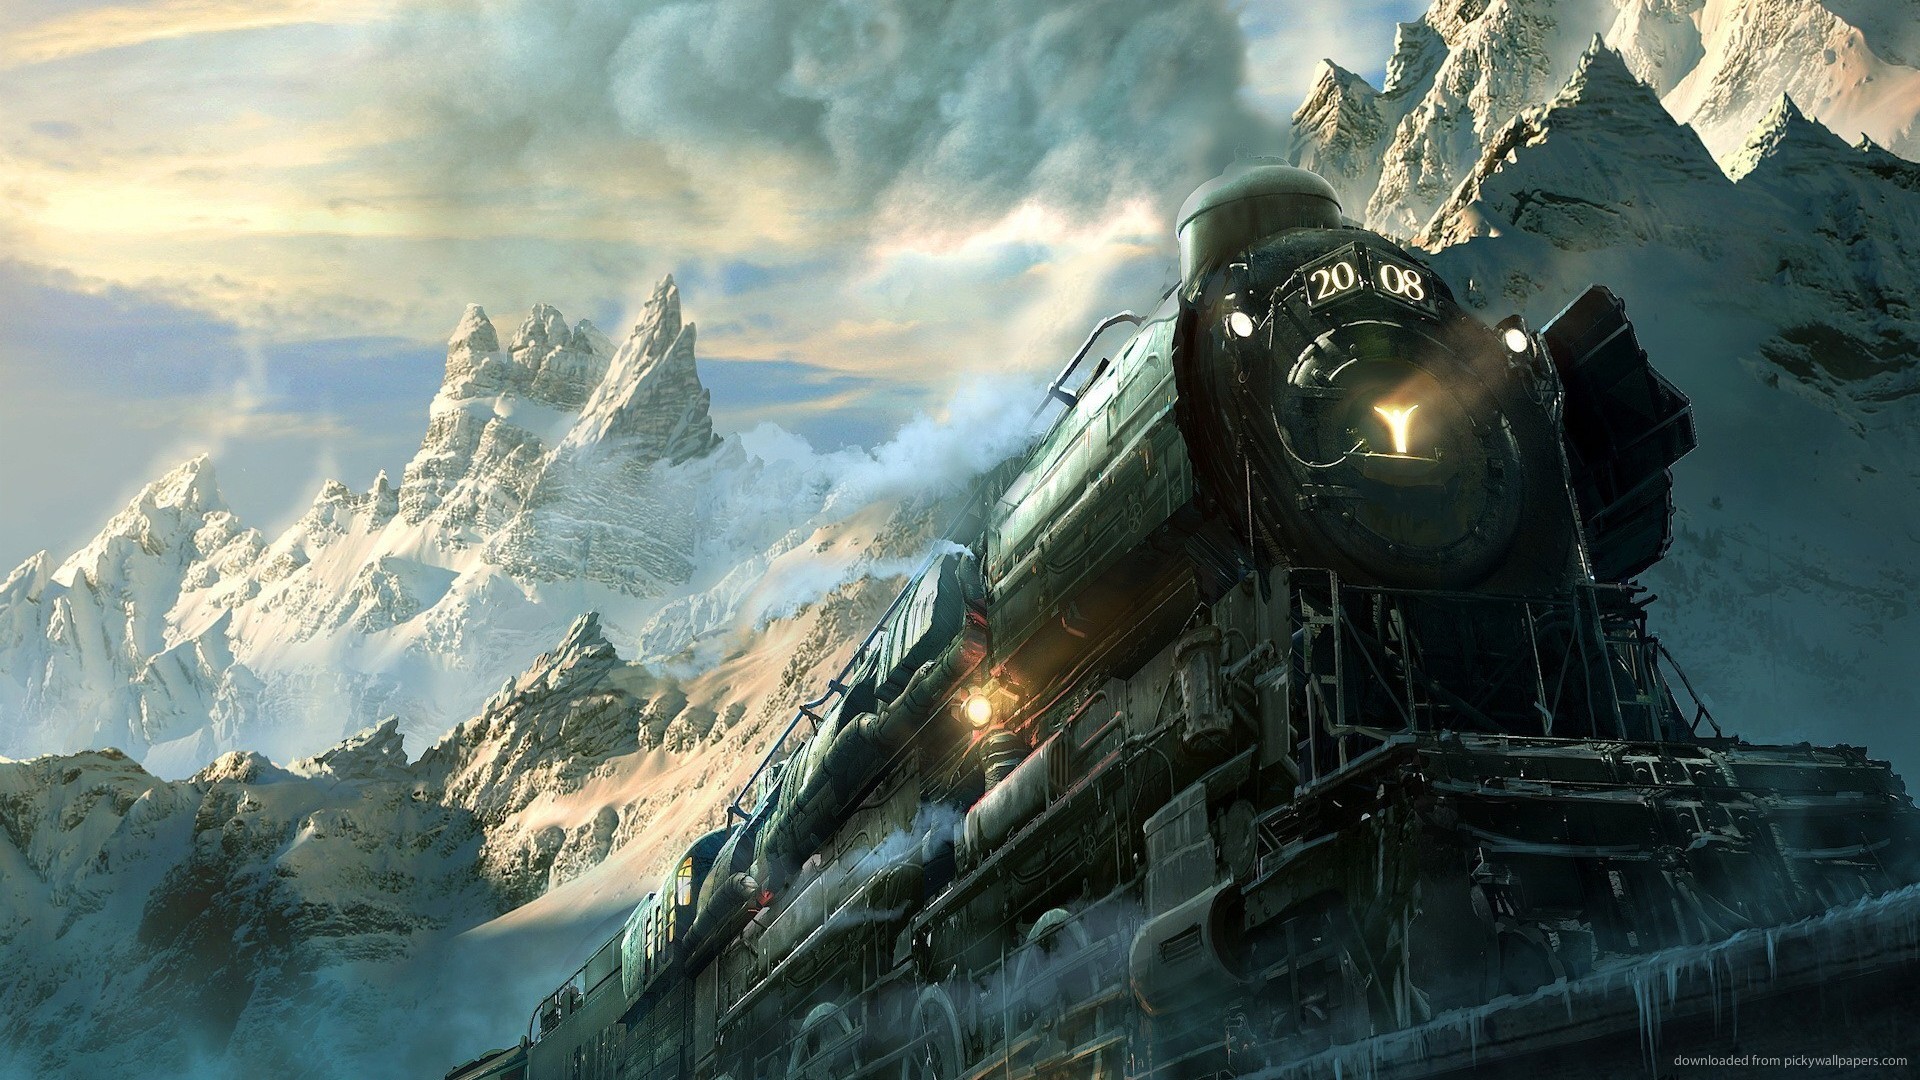  Blackberry iPad Epic Train Art Screensaver For Kindle3 And DX